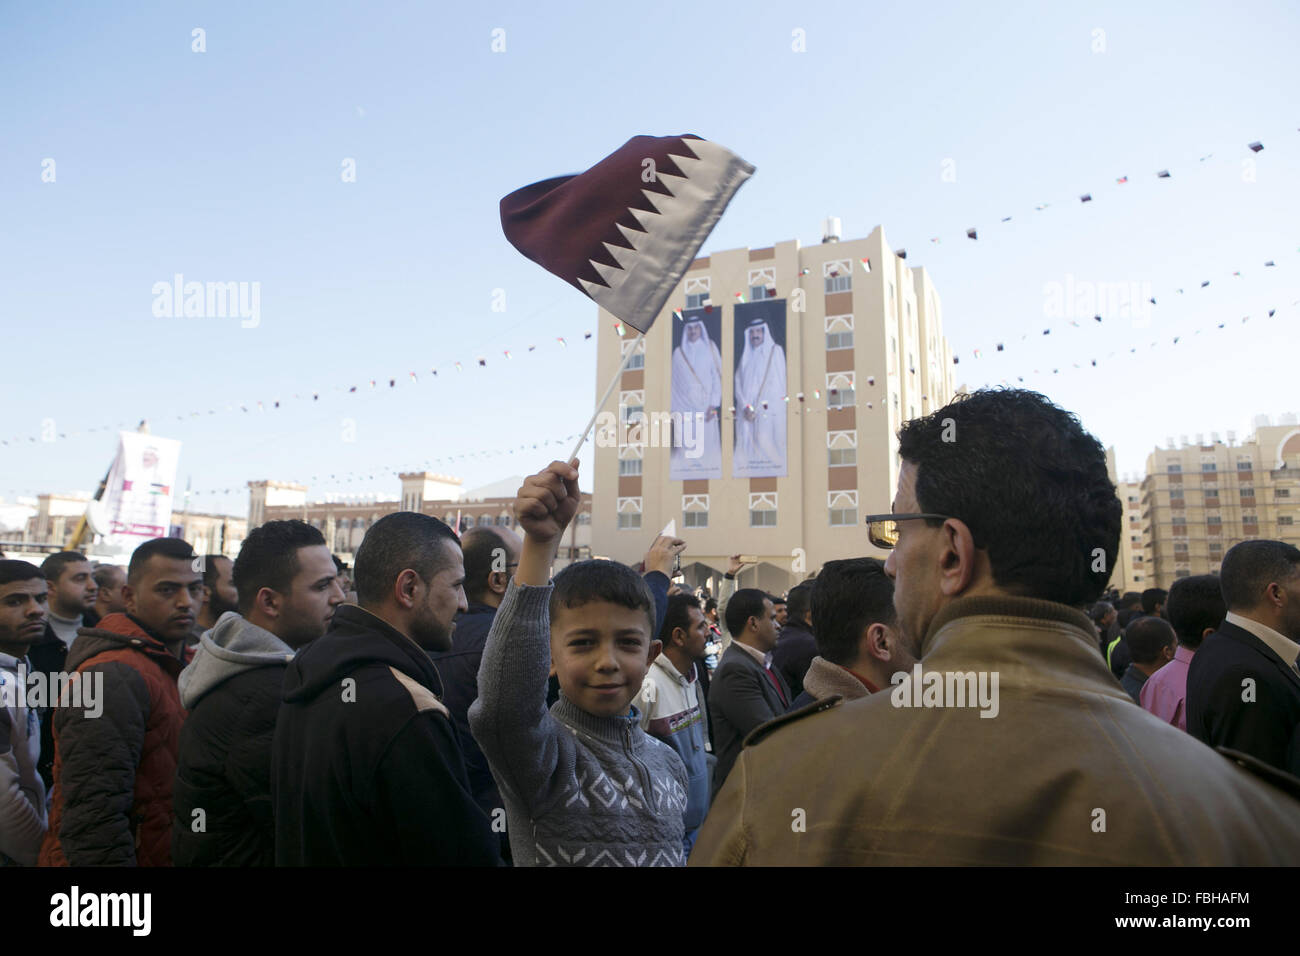 Khan Younis, Gaza Strip, Palestinian Territory. 16th Jan, 2016. Palestinians gather at the Qatari-funded Hamad City housing complex in Khan Younis, southern Gaza Strip, Saturday, Jan. 16, 2016. More than 1,000 Palestinian families have taken possession of new apartments in the first phase of the large housing project that sits on dunes that were part of the former Israeli Jewish settlement of Gush Katif. Huge portraits of former Qatari ruler, Sheik Hamad bin Khalifa Al Thani, right, his son, the current emir, Tamim bin Hamad bin Khalifa Al Thani, and the Qatari flag hang on one of the buildin Stock Photo